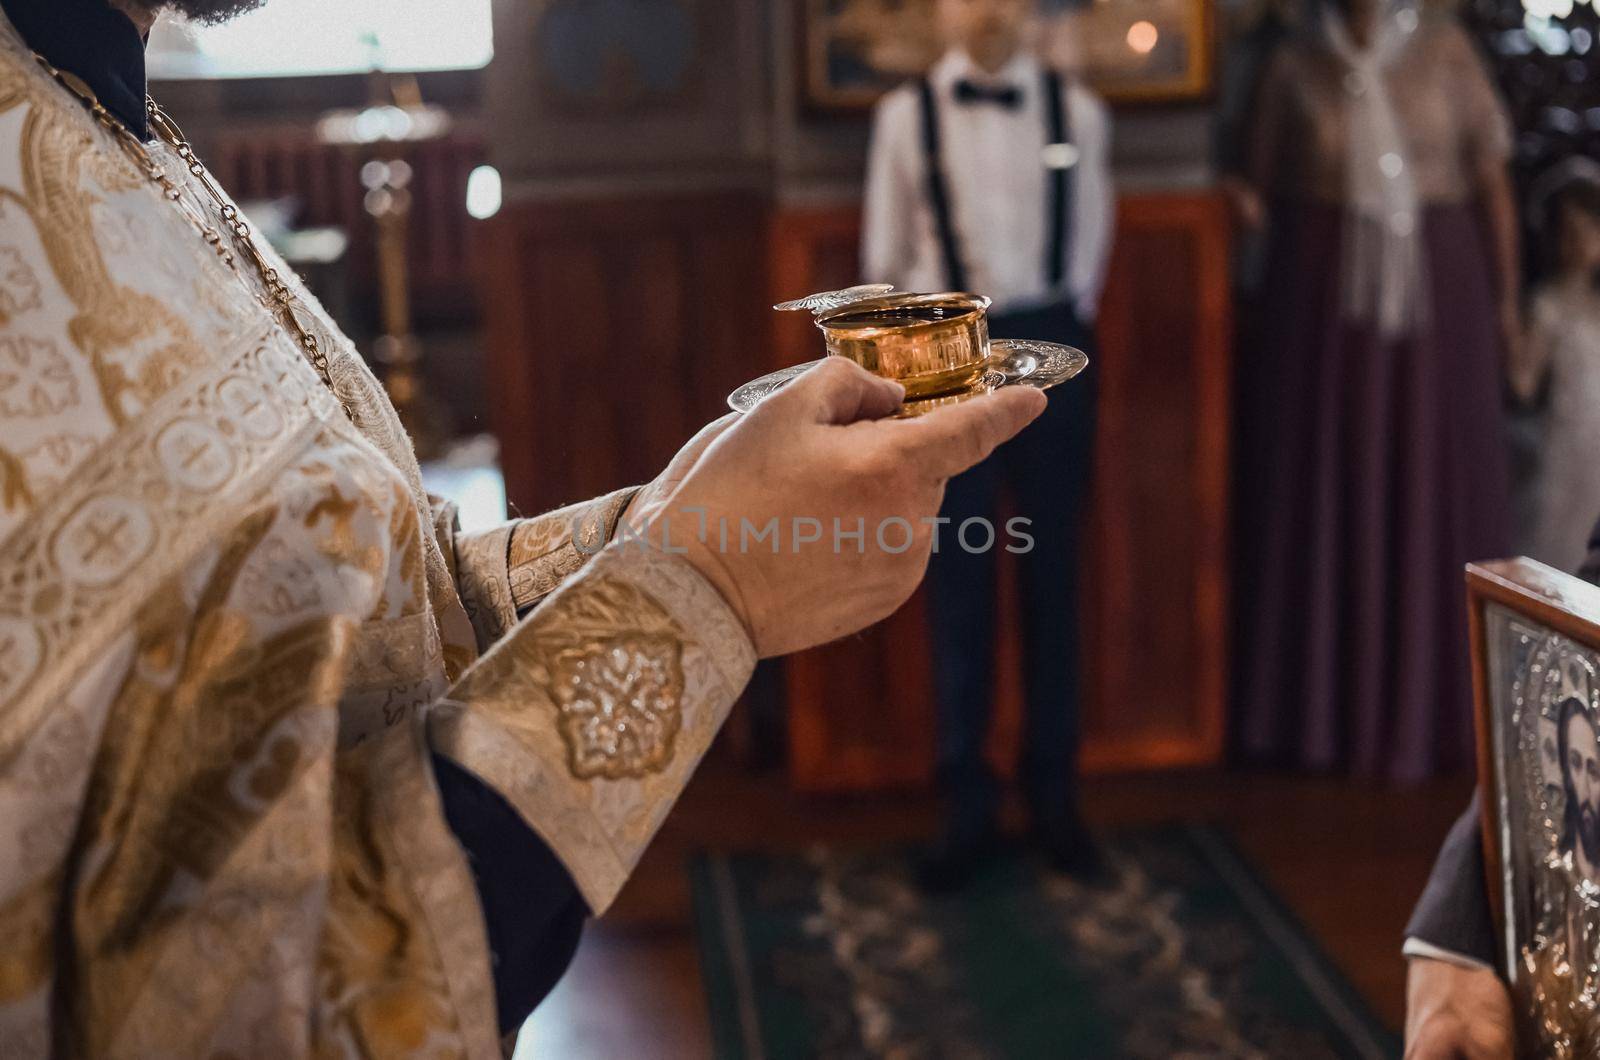 A priest in a golden cassock holds a small mug of sacred red wine on a platter.